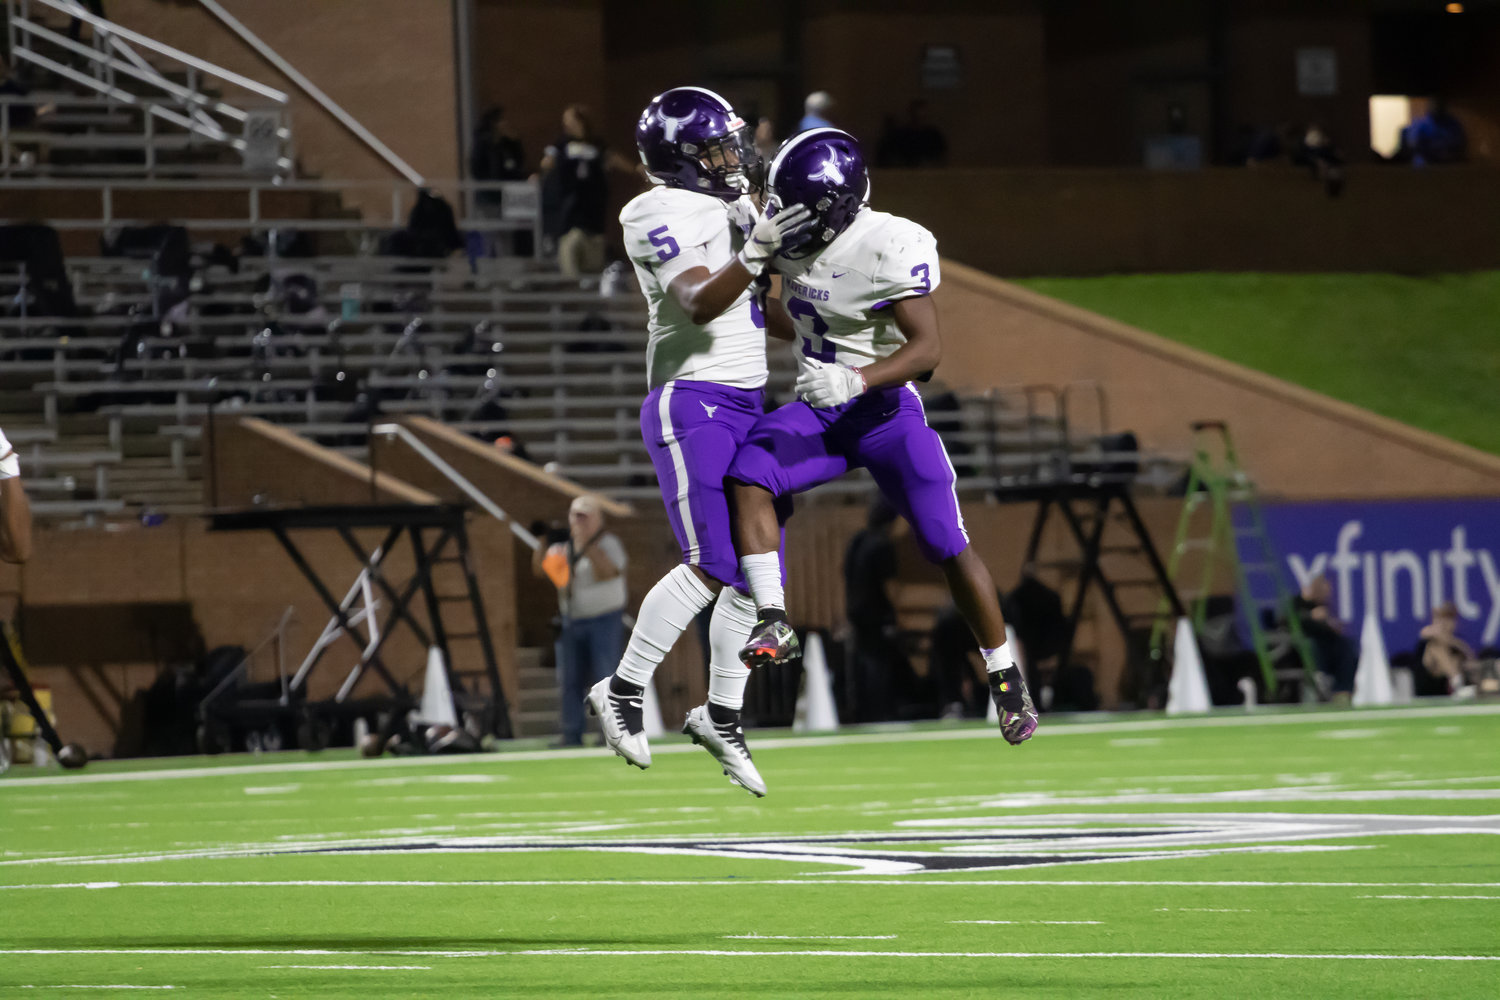 Morton Ranch's Santana Scott and Amiri Jack celebrate after Jack make an interception which he returned for a touchdown.